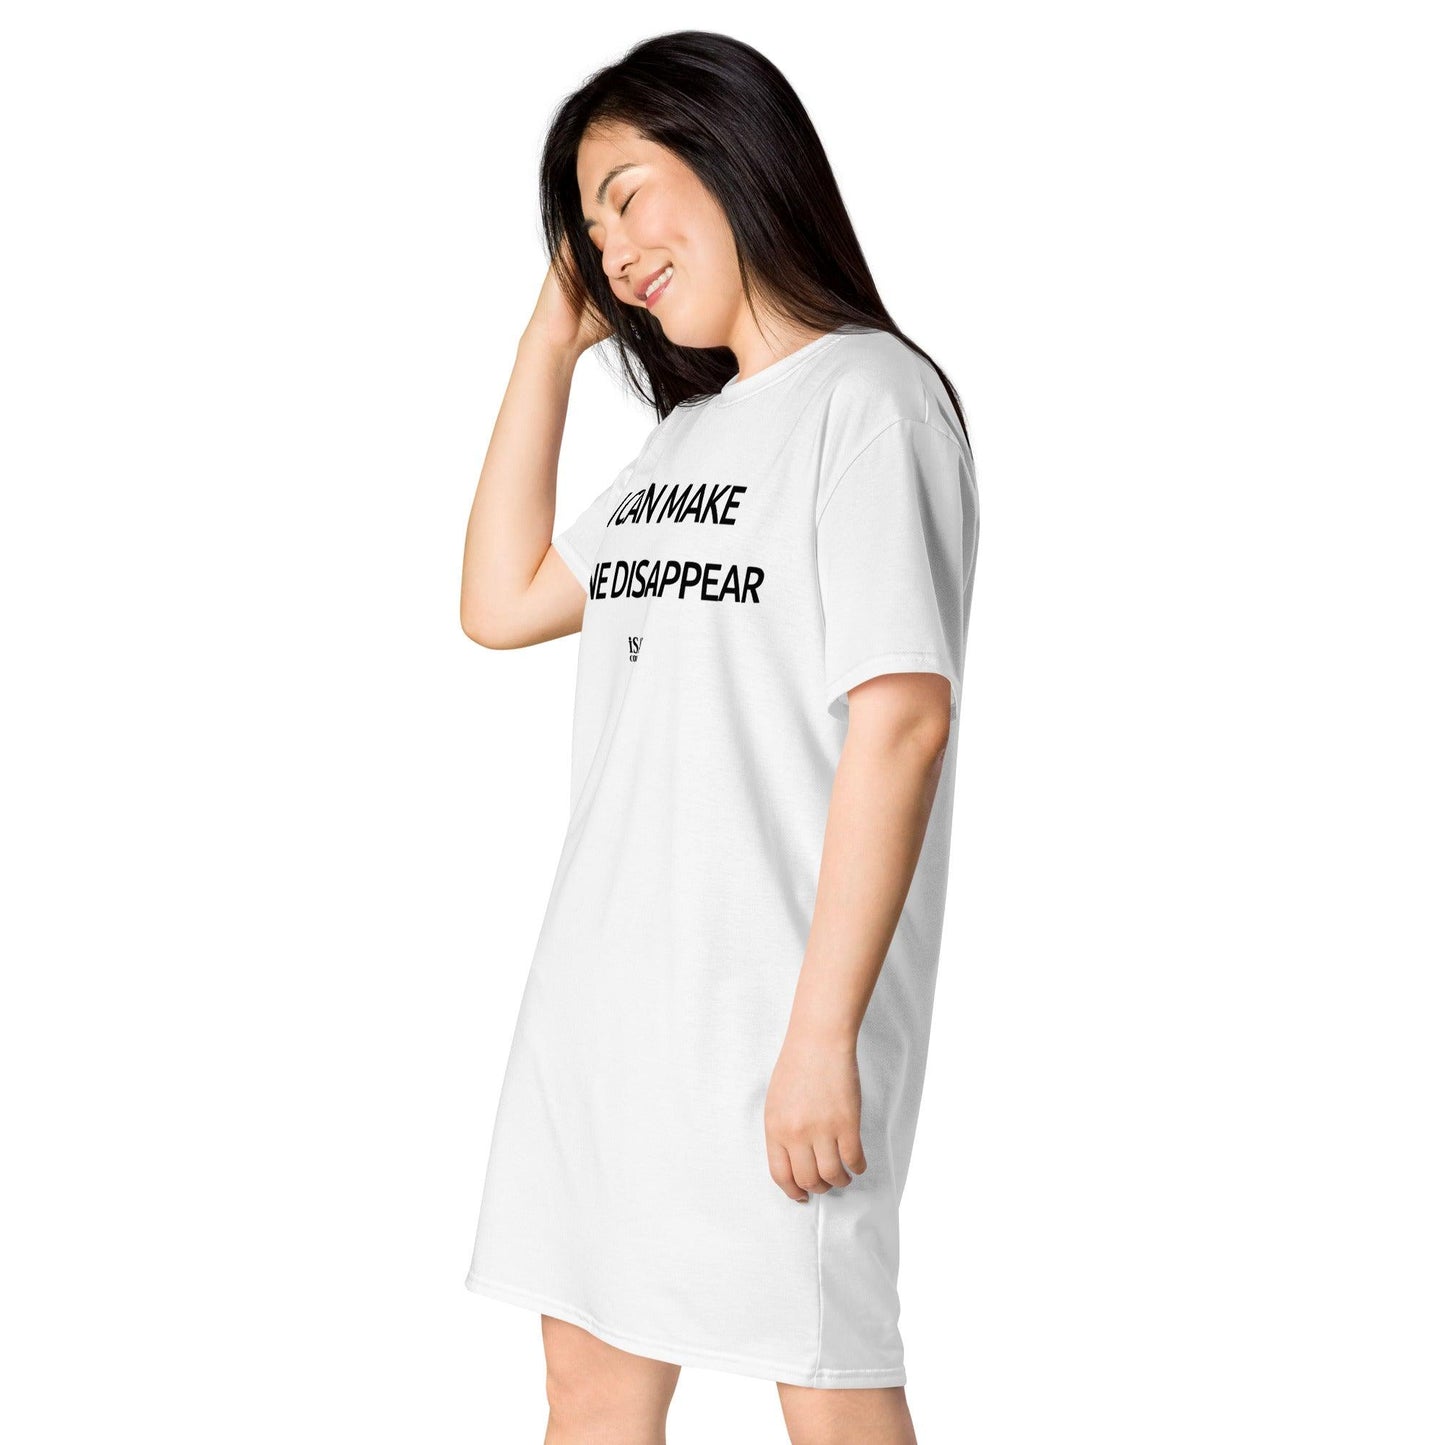 I Can Make Wine Disappear - Womens White T-Shirt Dress - iSAW Company